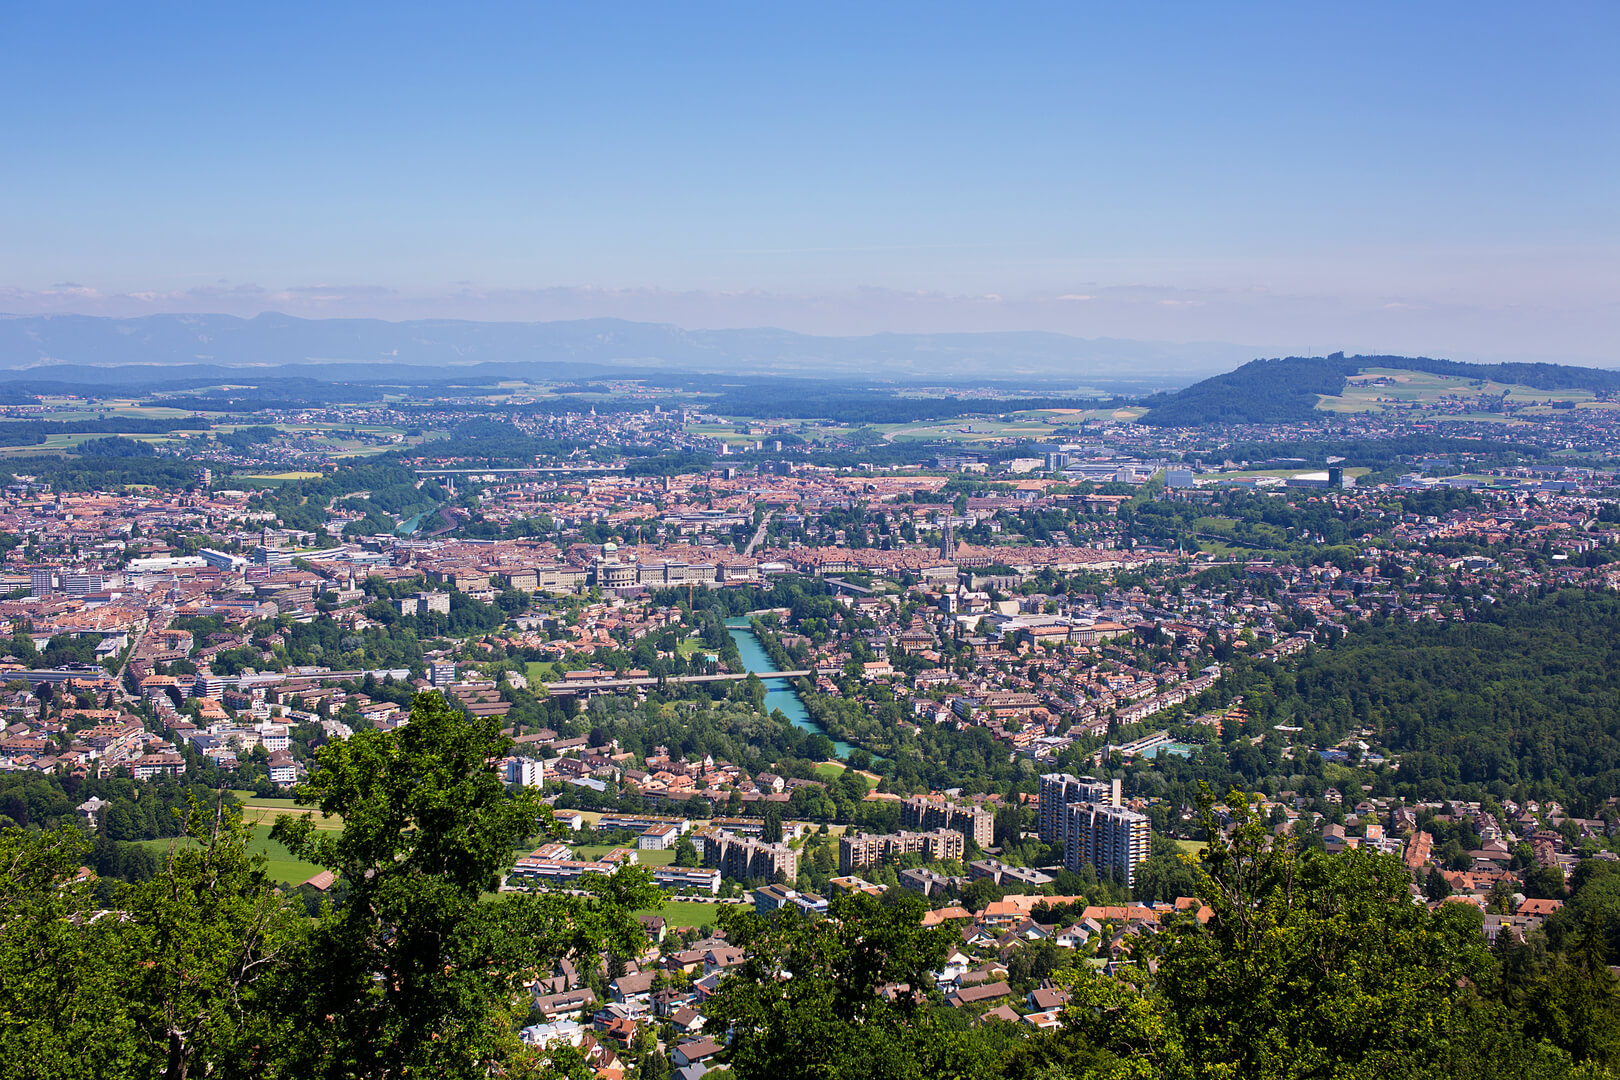 The view of the city Bern from mountain Gurten in summer